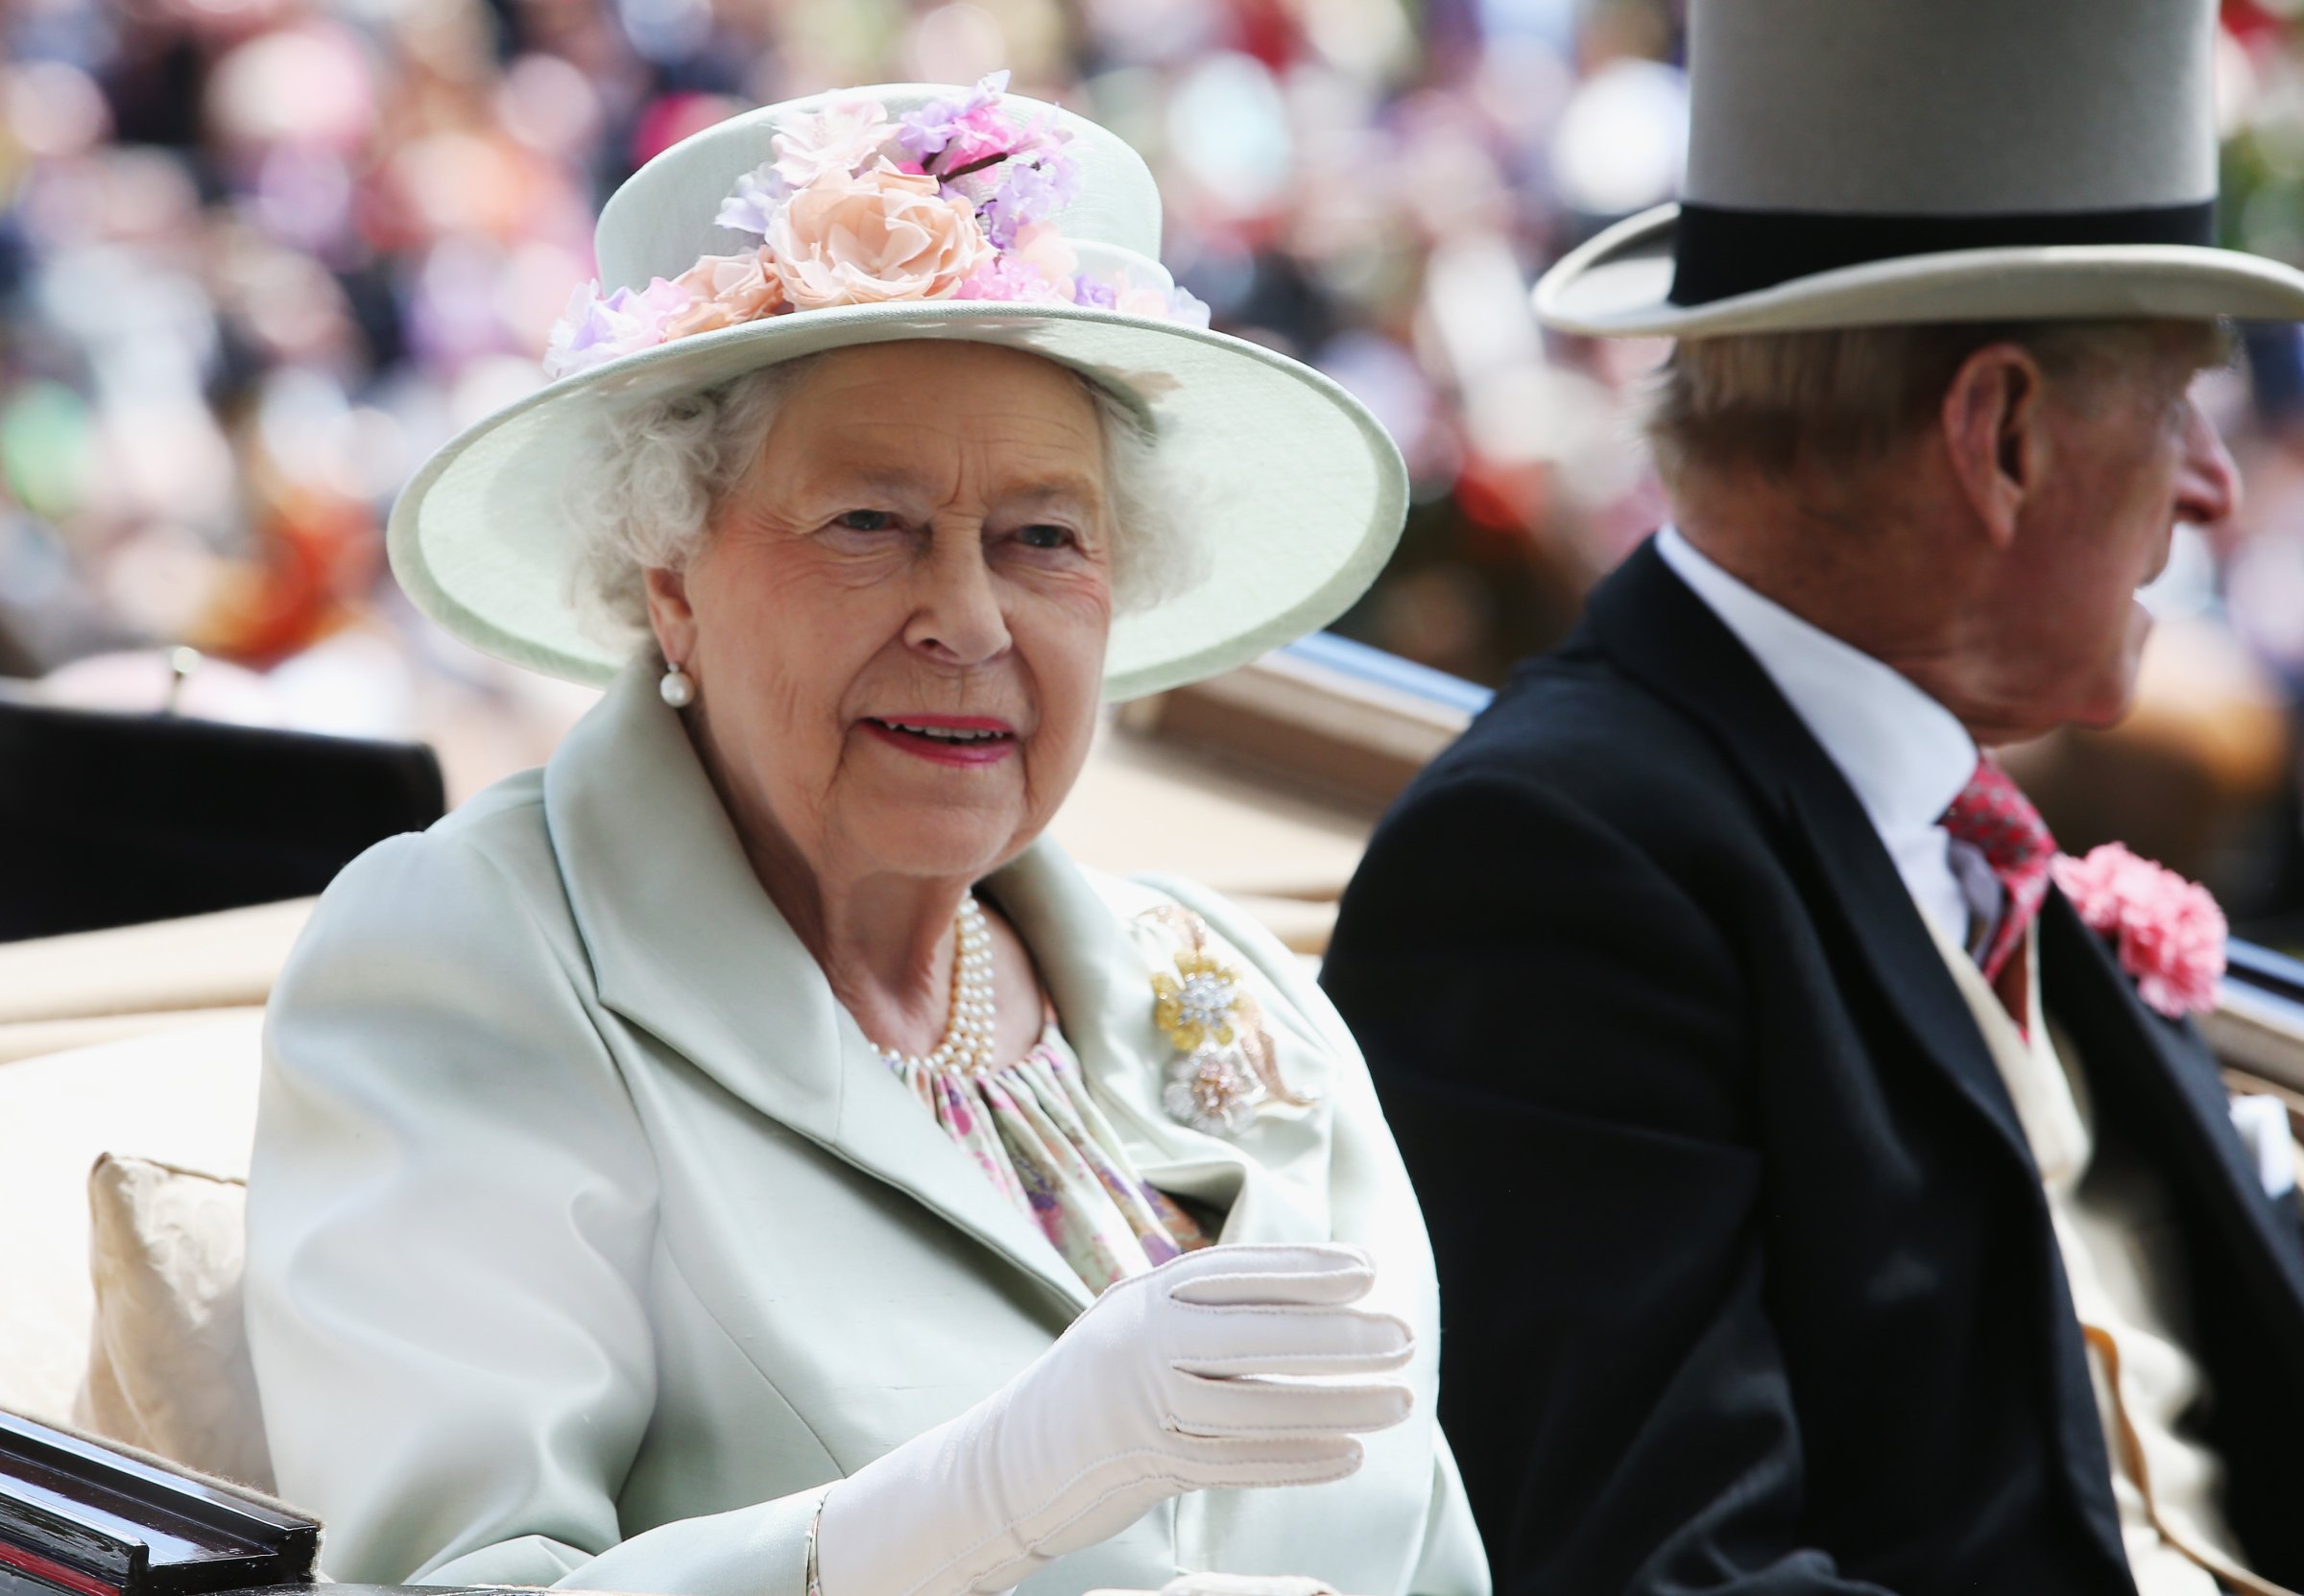 Queen of England at Royal Ascot Festival